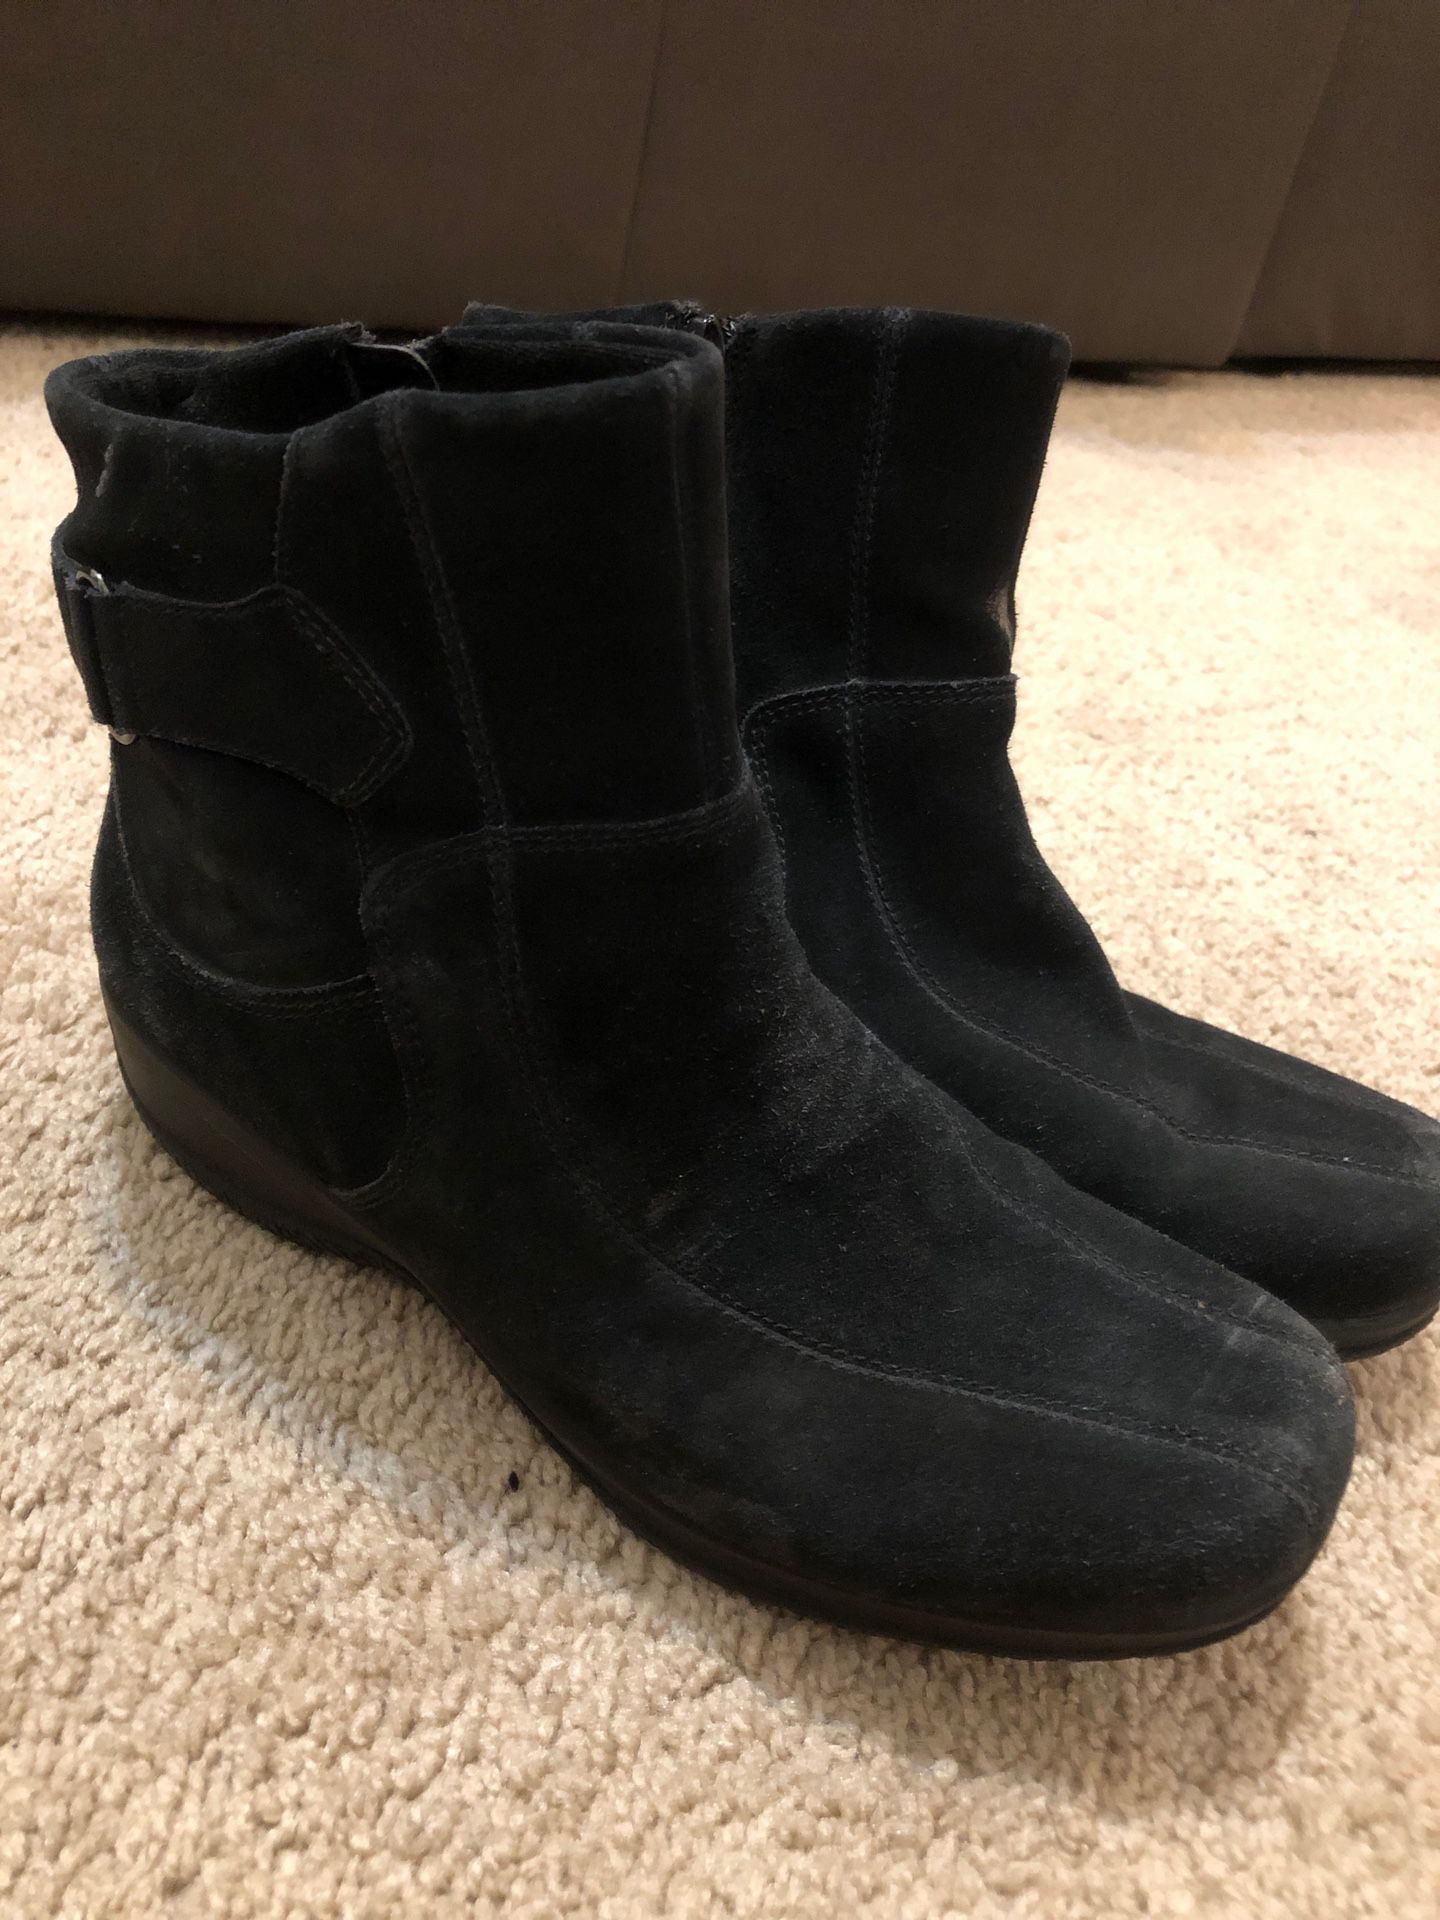 Women’s Suede boots size 8